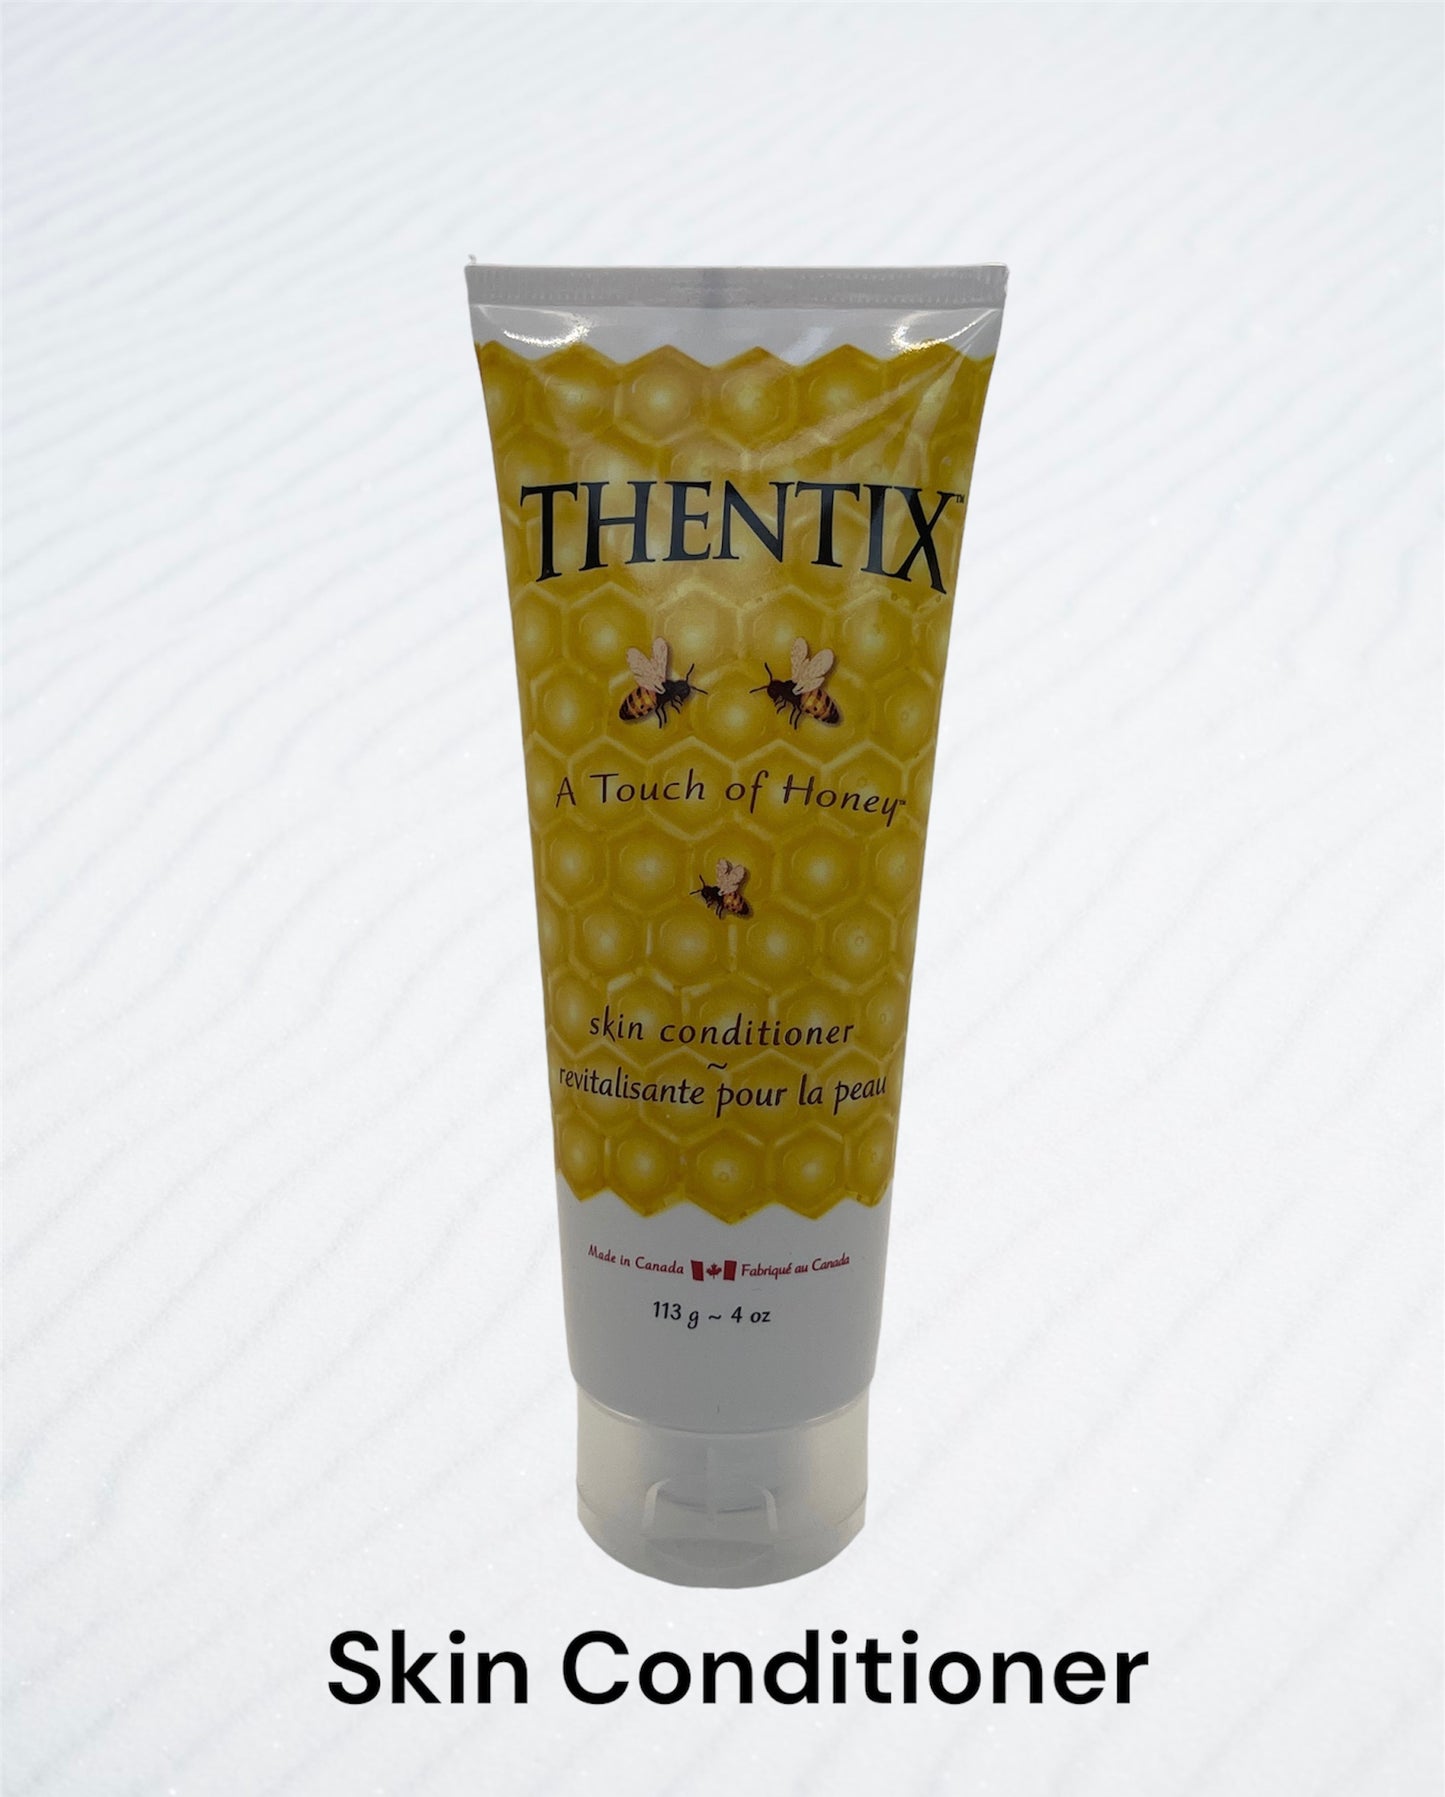 Thentix, A Touch of Honey Skin Conditioner